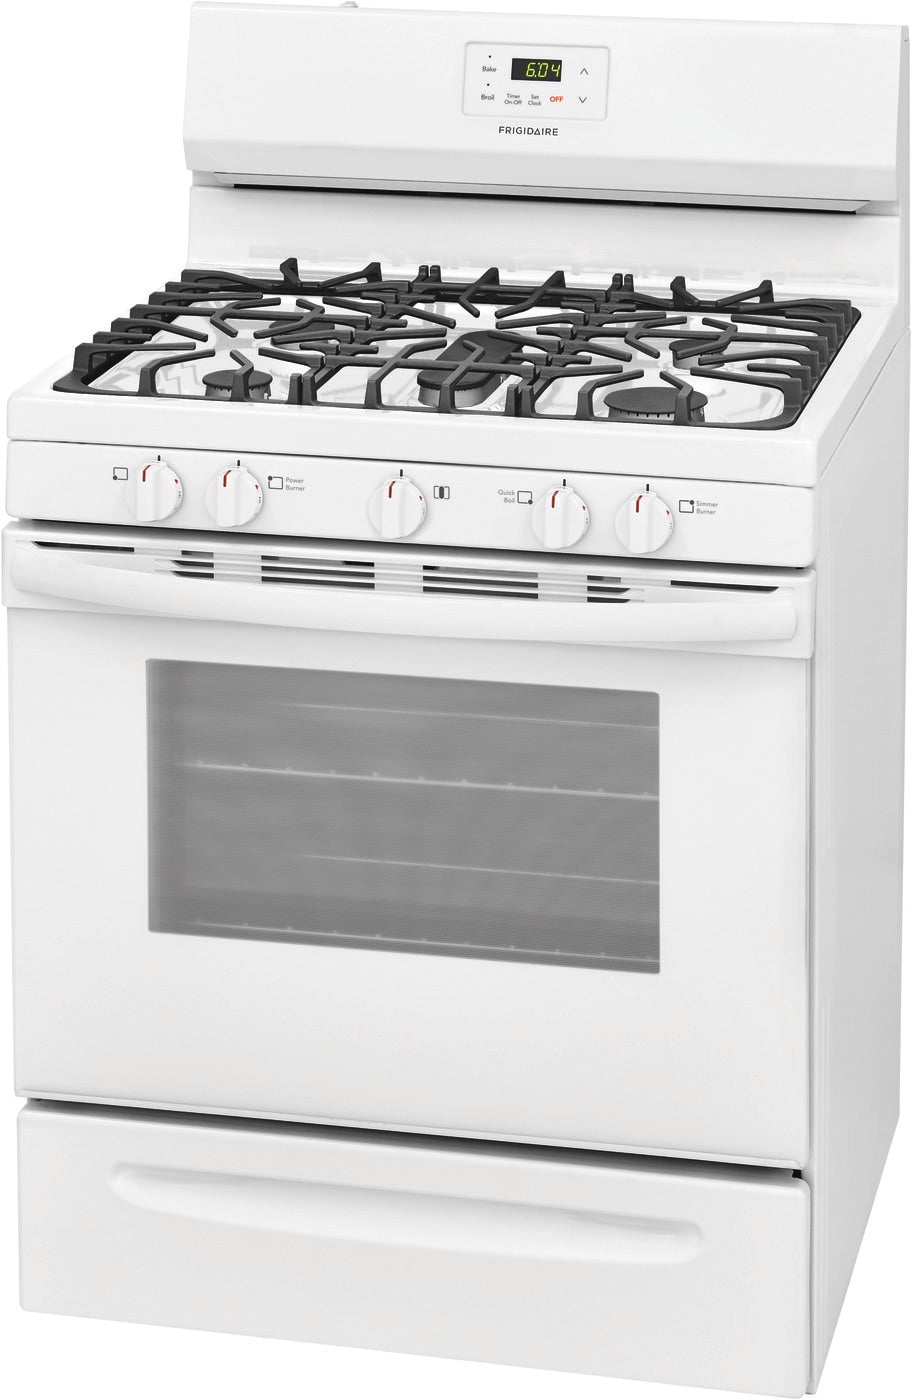 Frigidaire - 5 cu. ft  Gas Range in White - FCRG3052AW